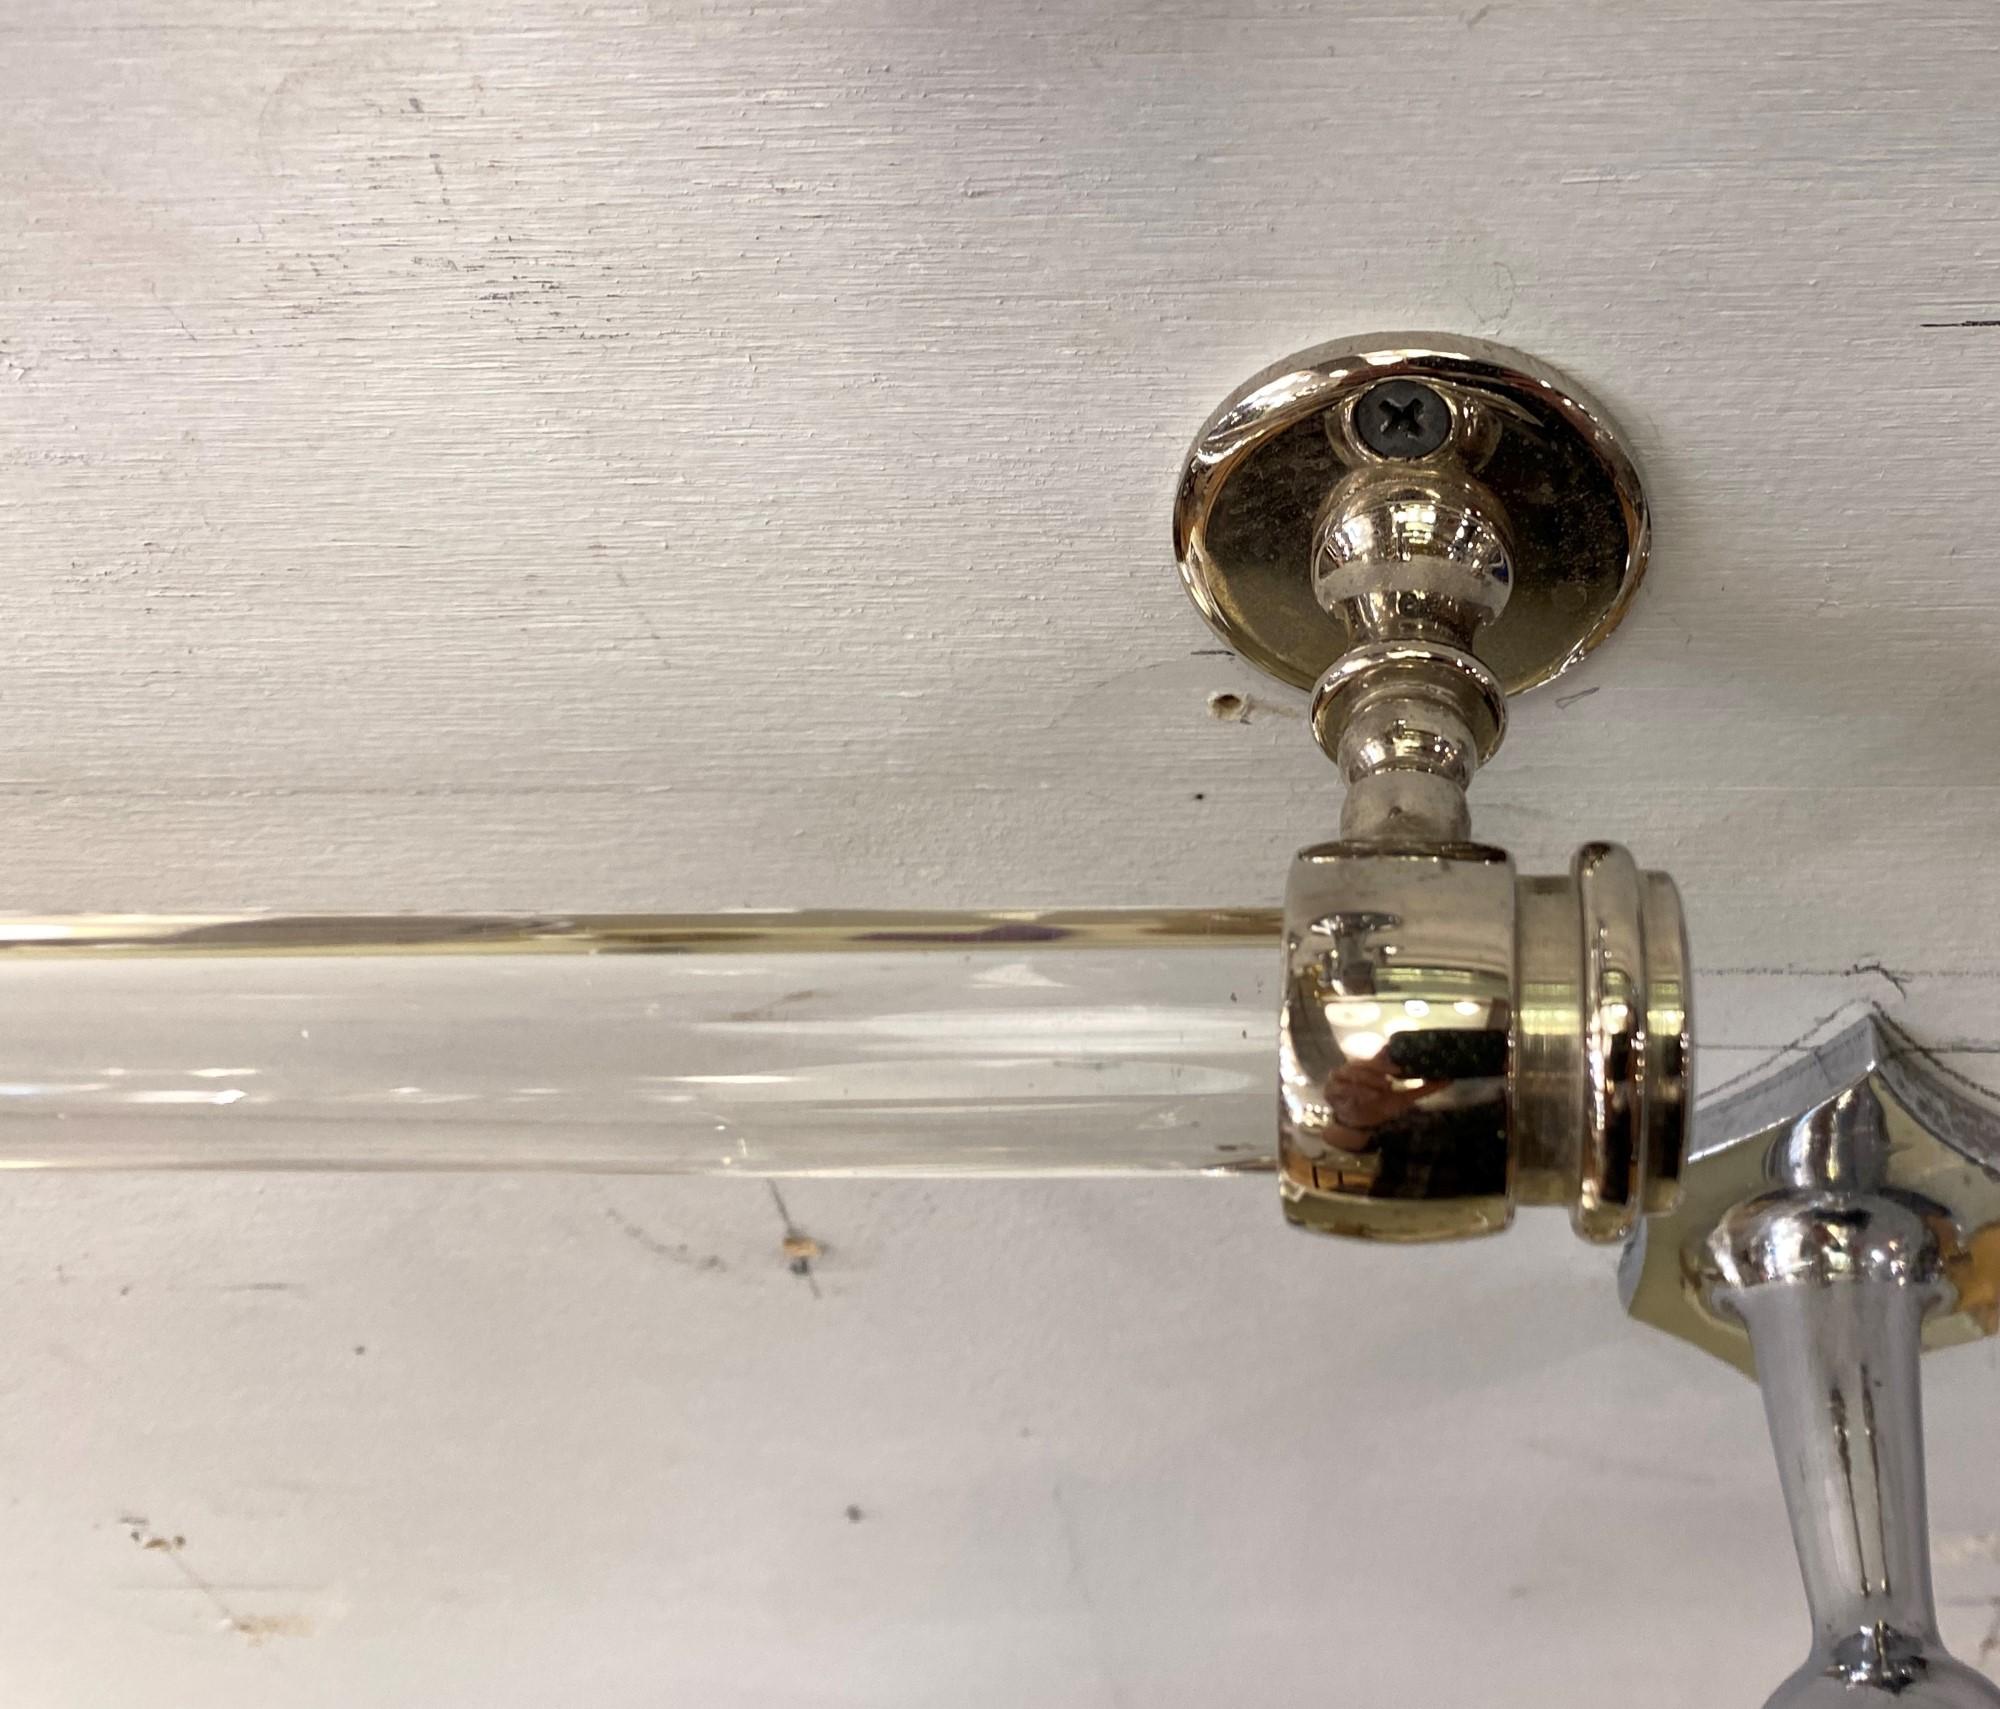 20th Century Nickel Plated Bath Clear Glass Towel Bar by Sterling Ham Co. England Mid-20th C.